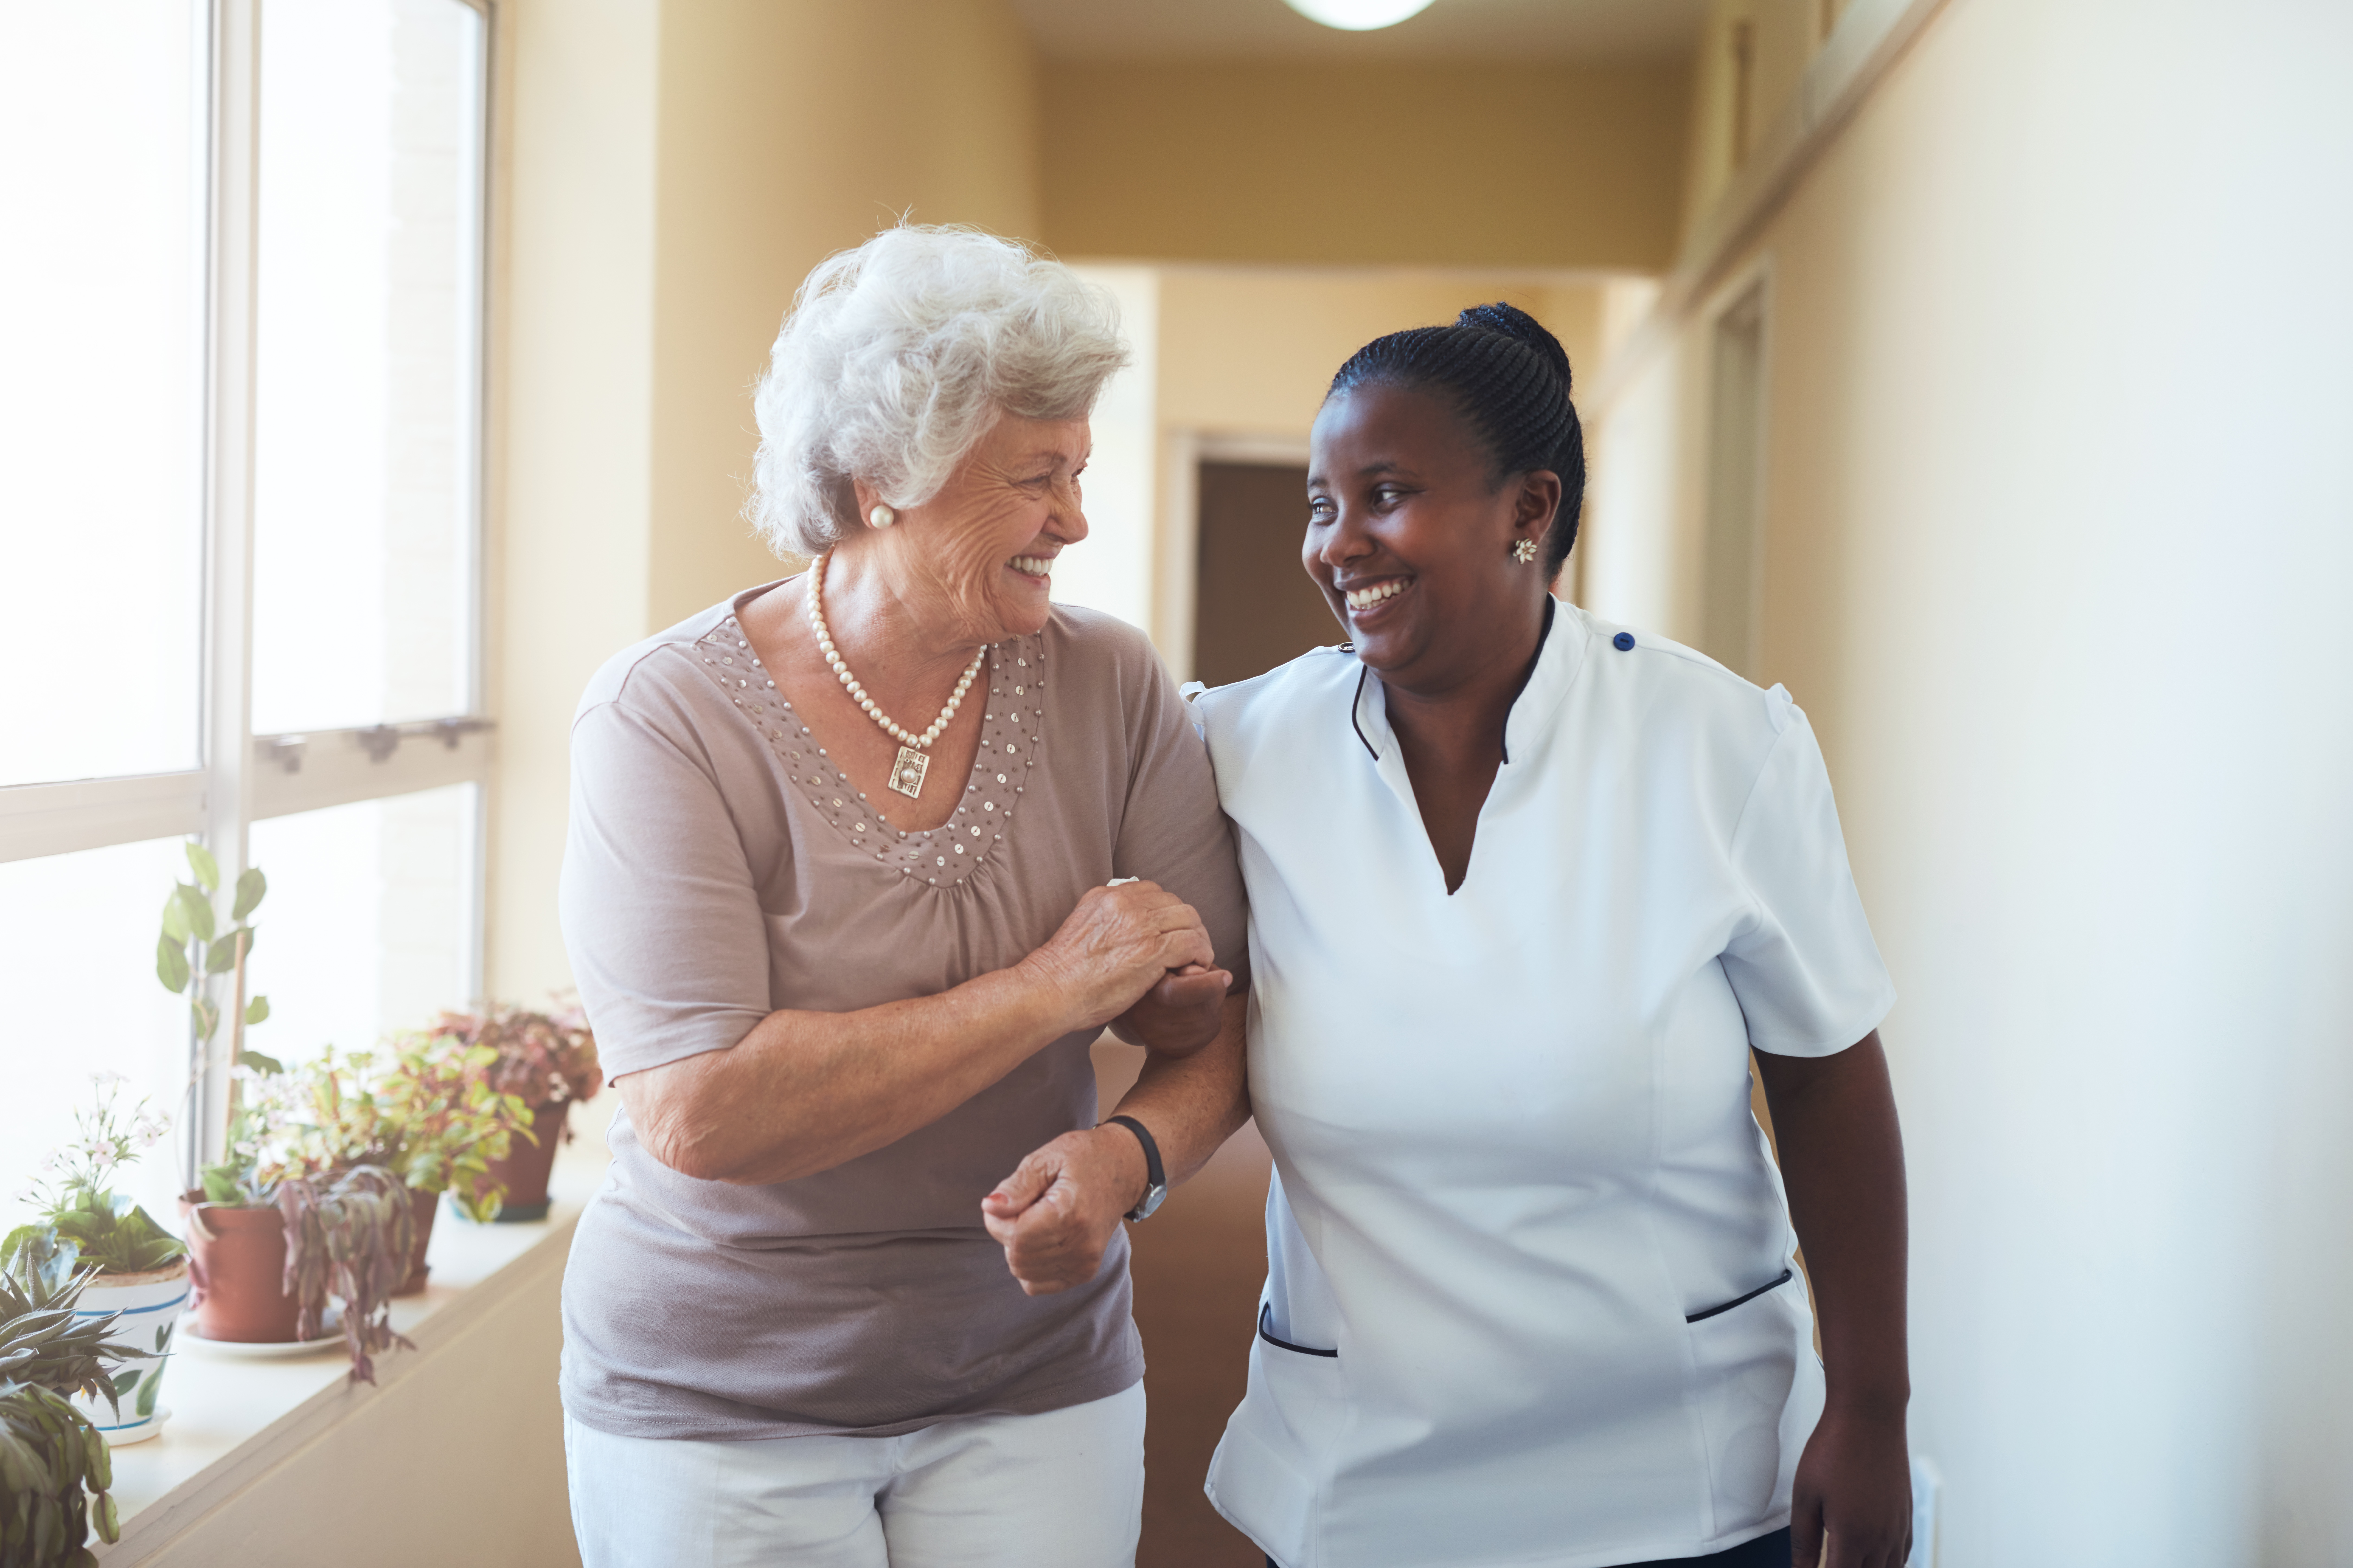 Caregiver holds arm of senior woman as they smile at one another and walk down a light-filled hallway together